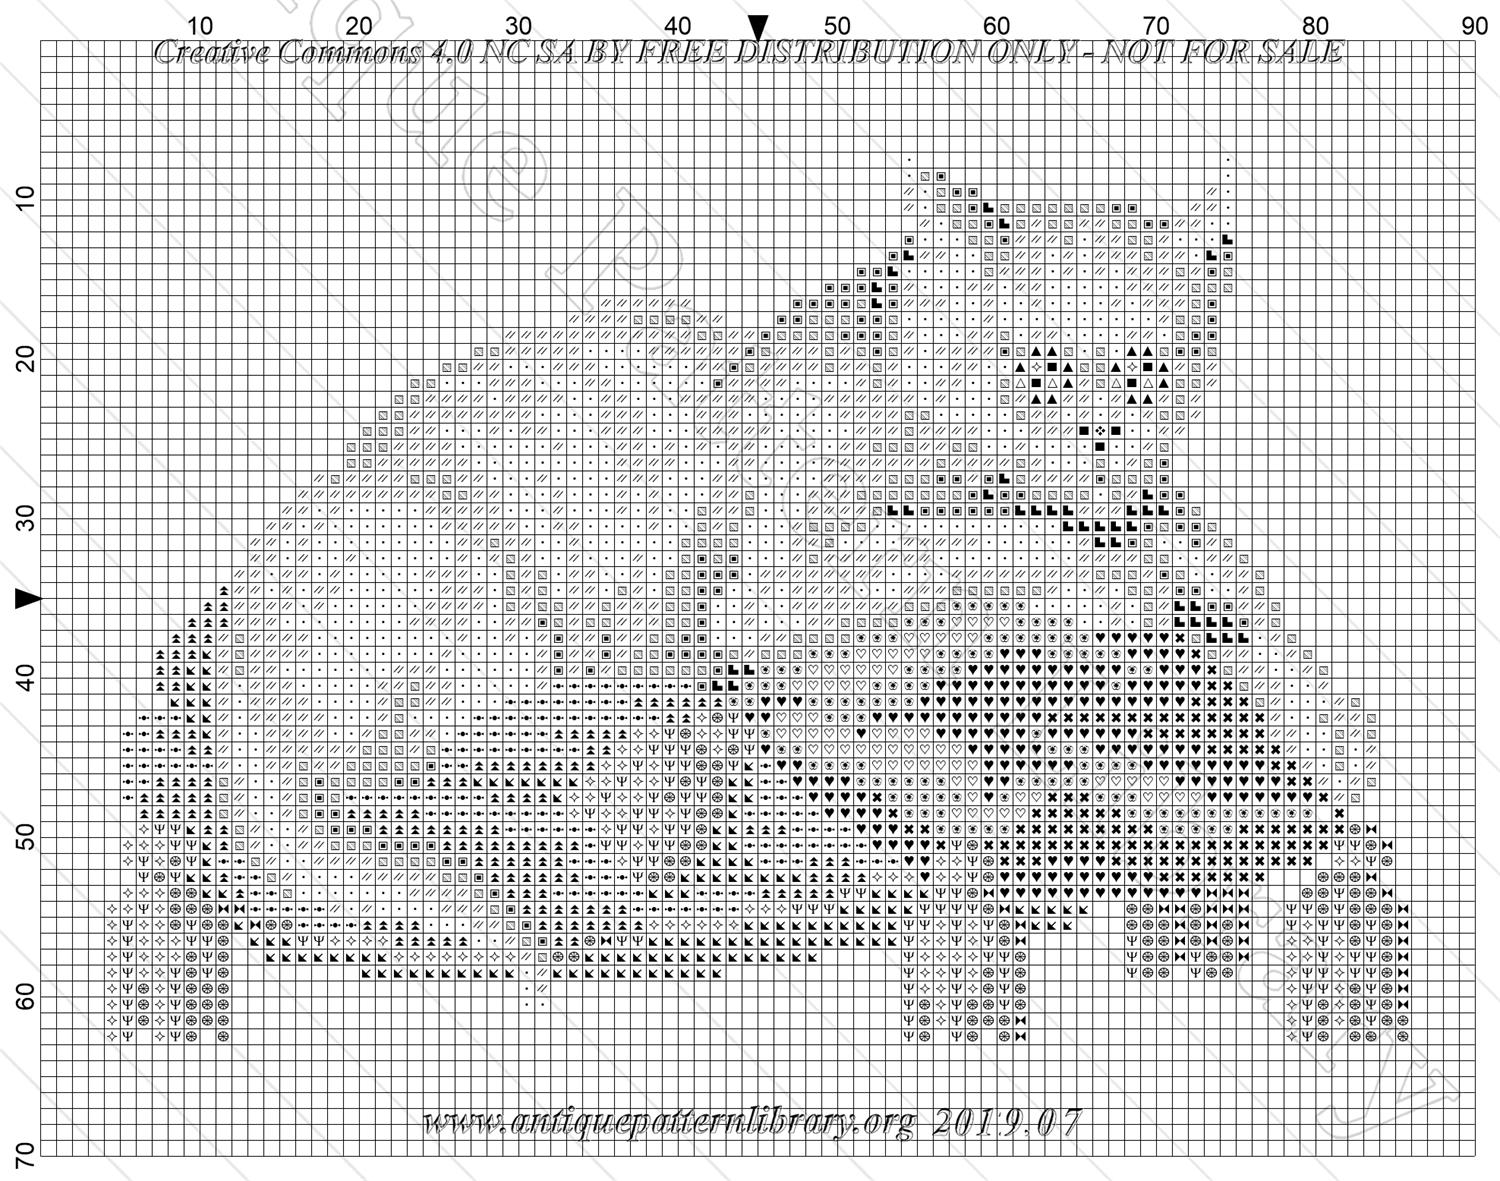 I-II006 White cat on red and purple pillows